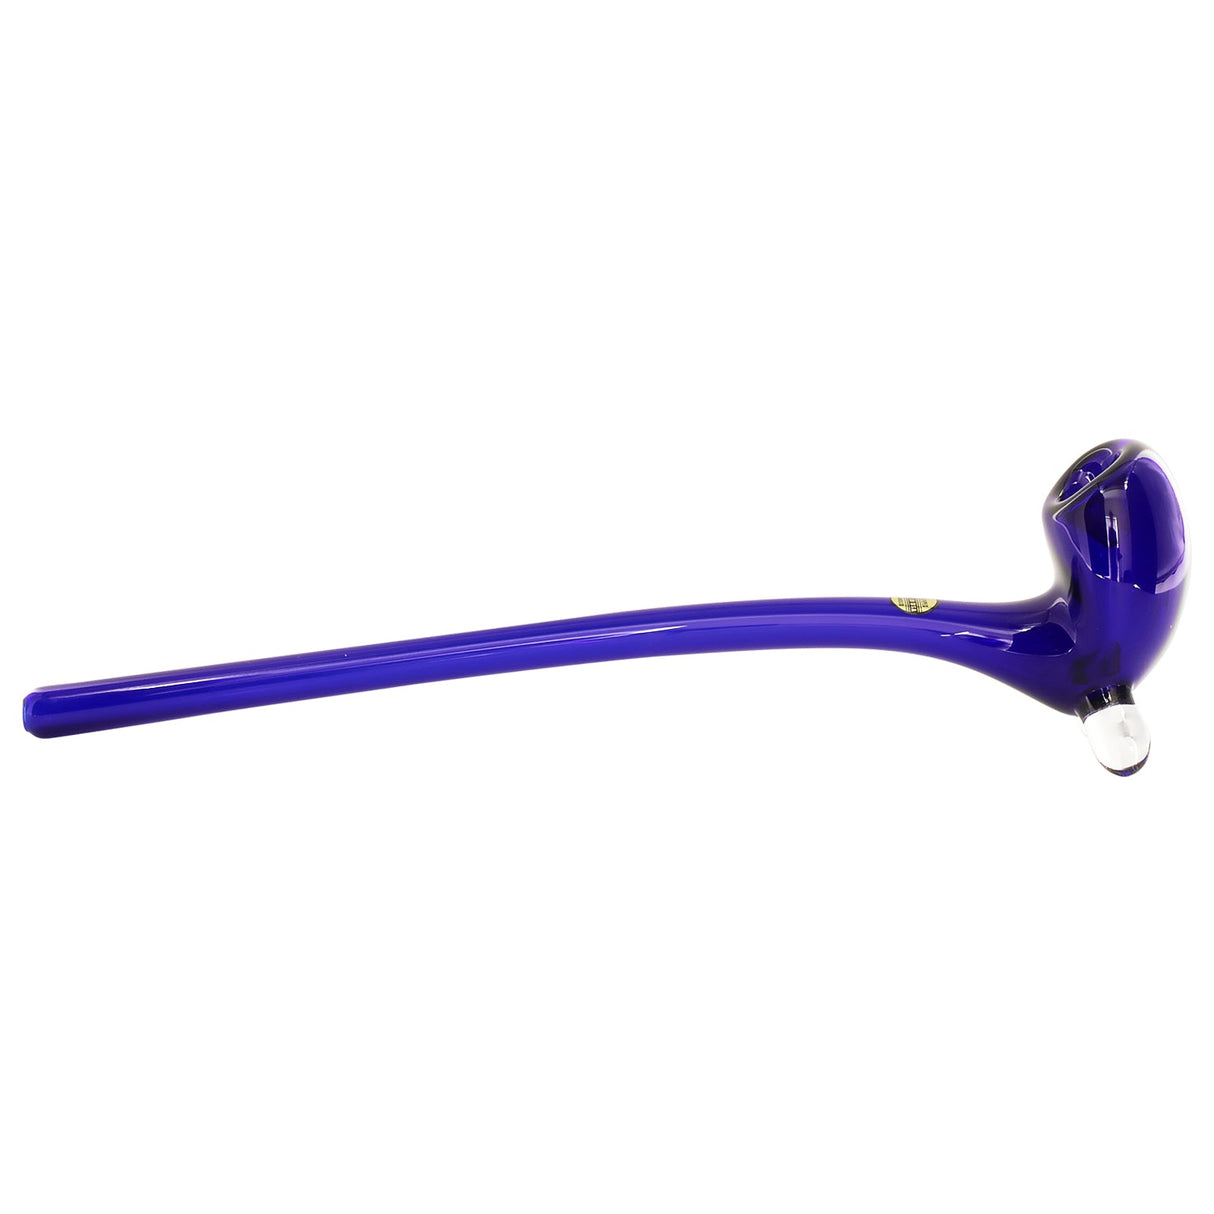 LA Pipes "The Gandalf" Pipe in blue borosilicate glass, 10" long with deep bowl - side view